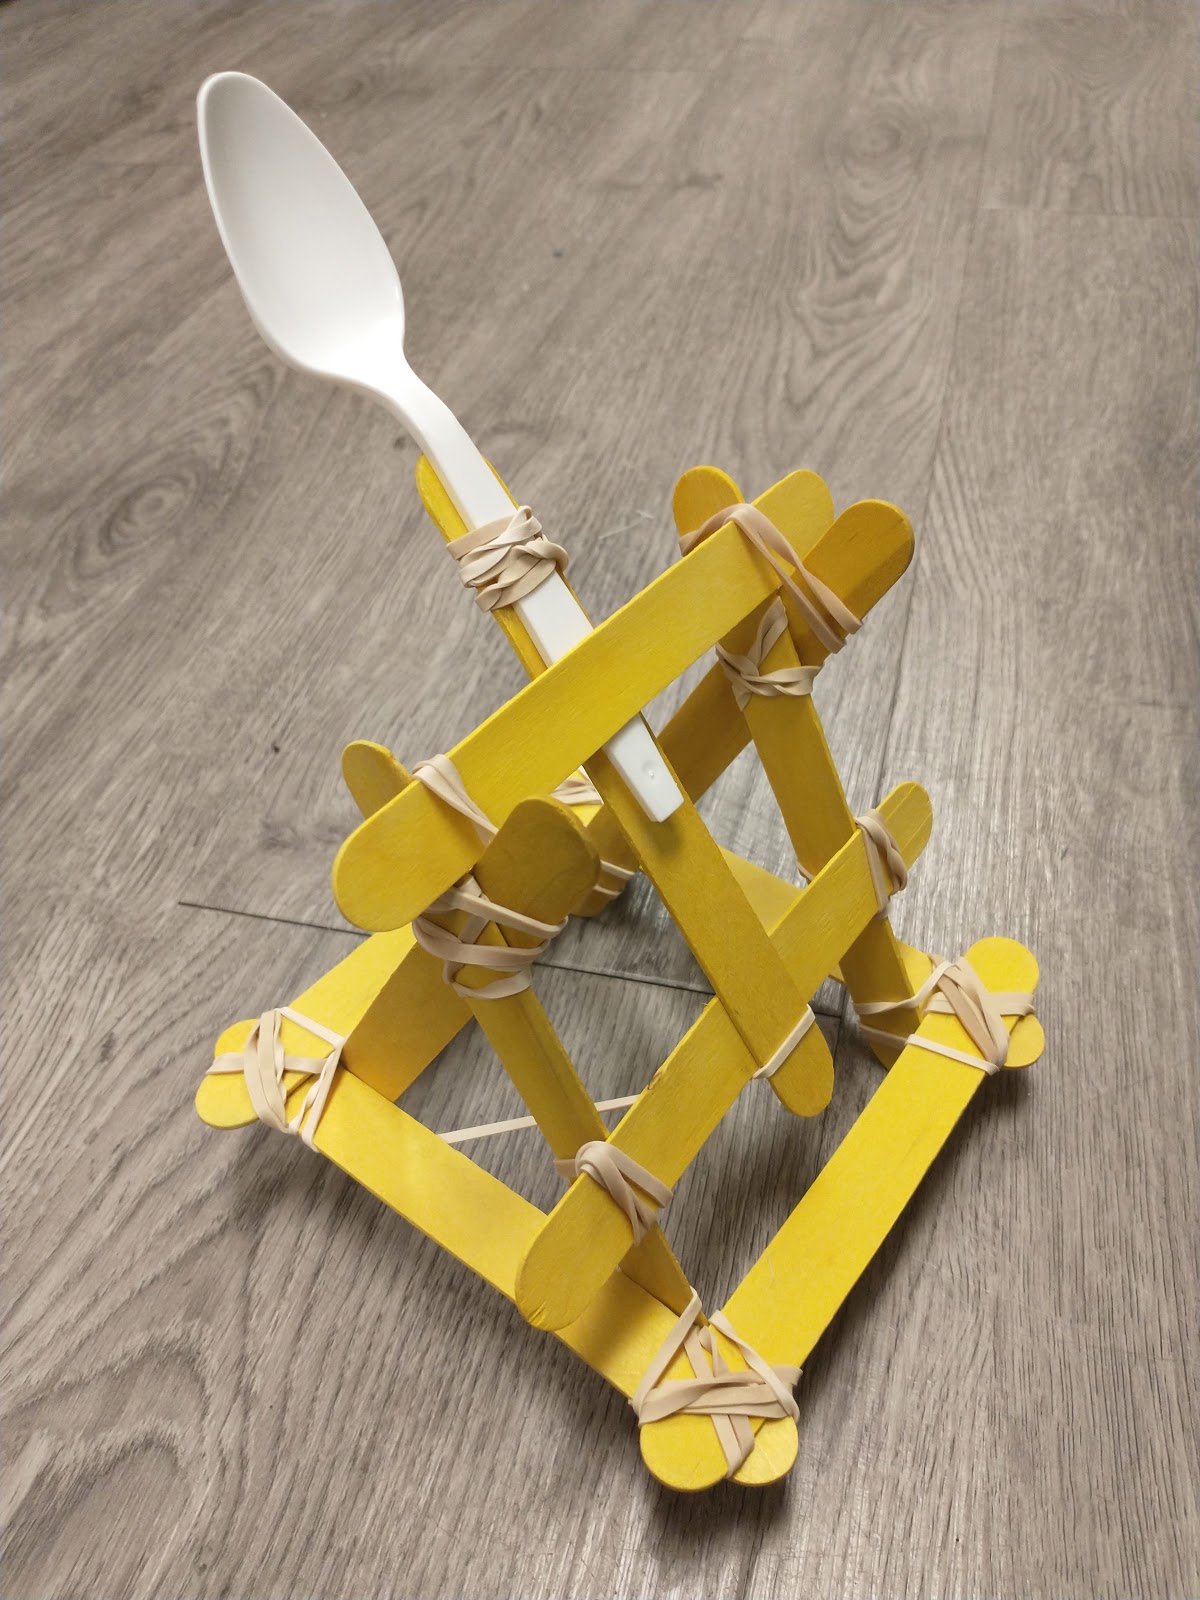 How to Make a Popsicle Stick Catapult